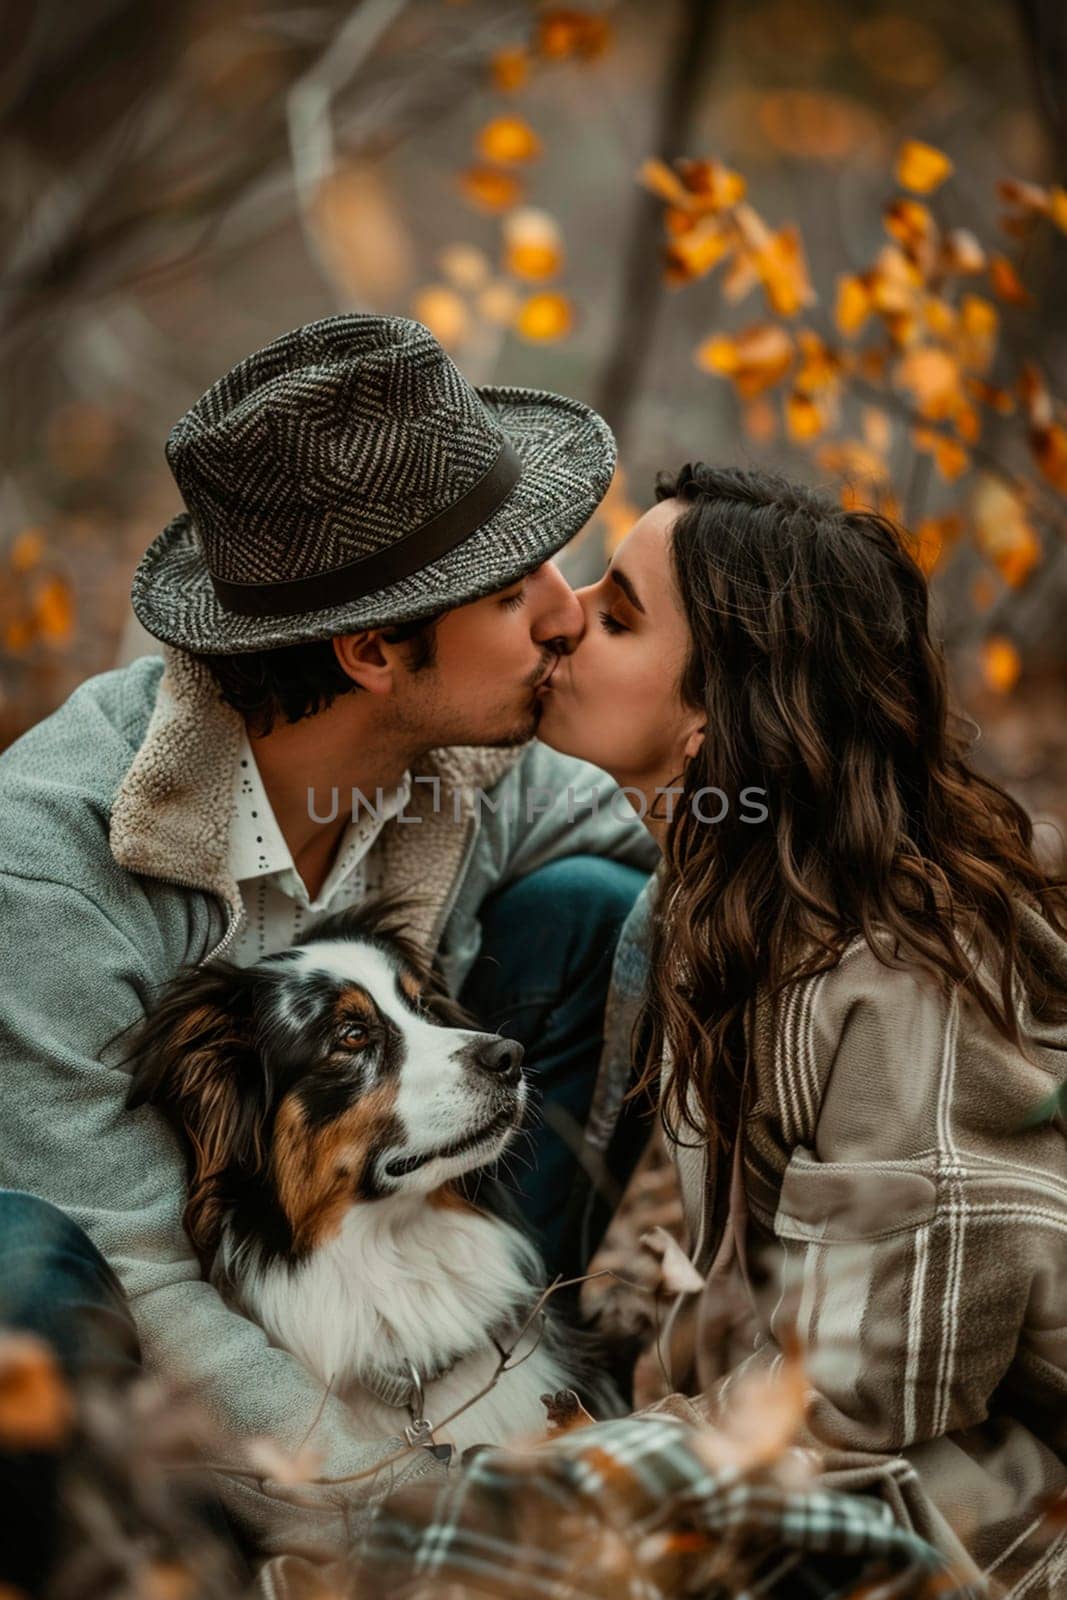 the owner kisses the dog. Selective focus. people.